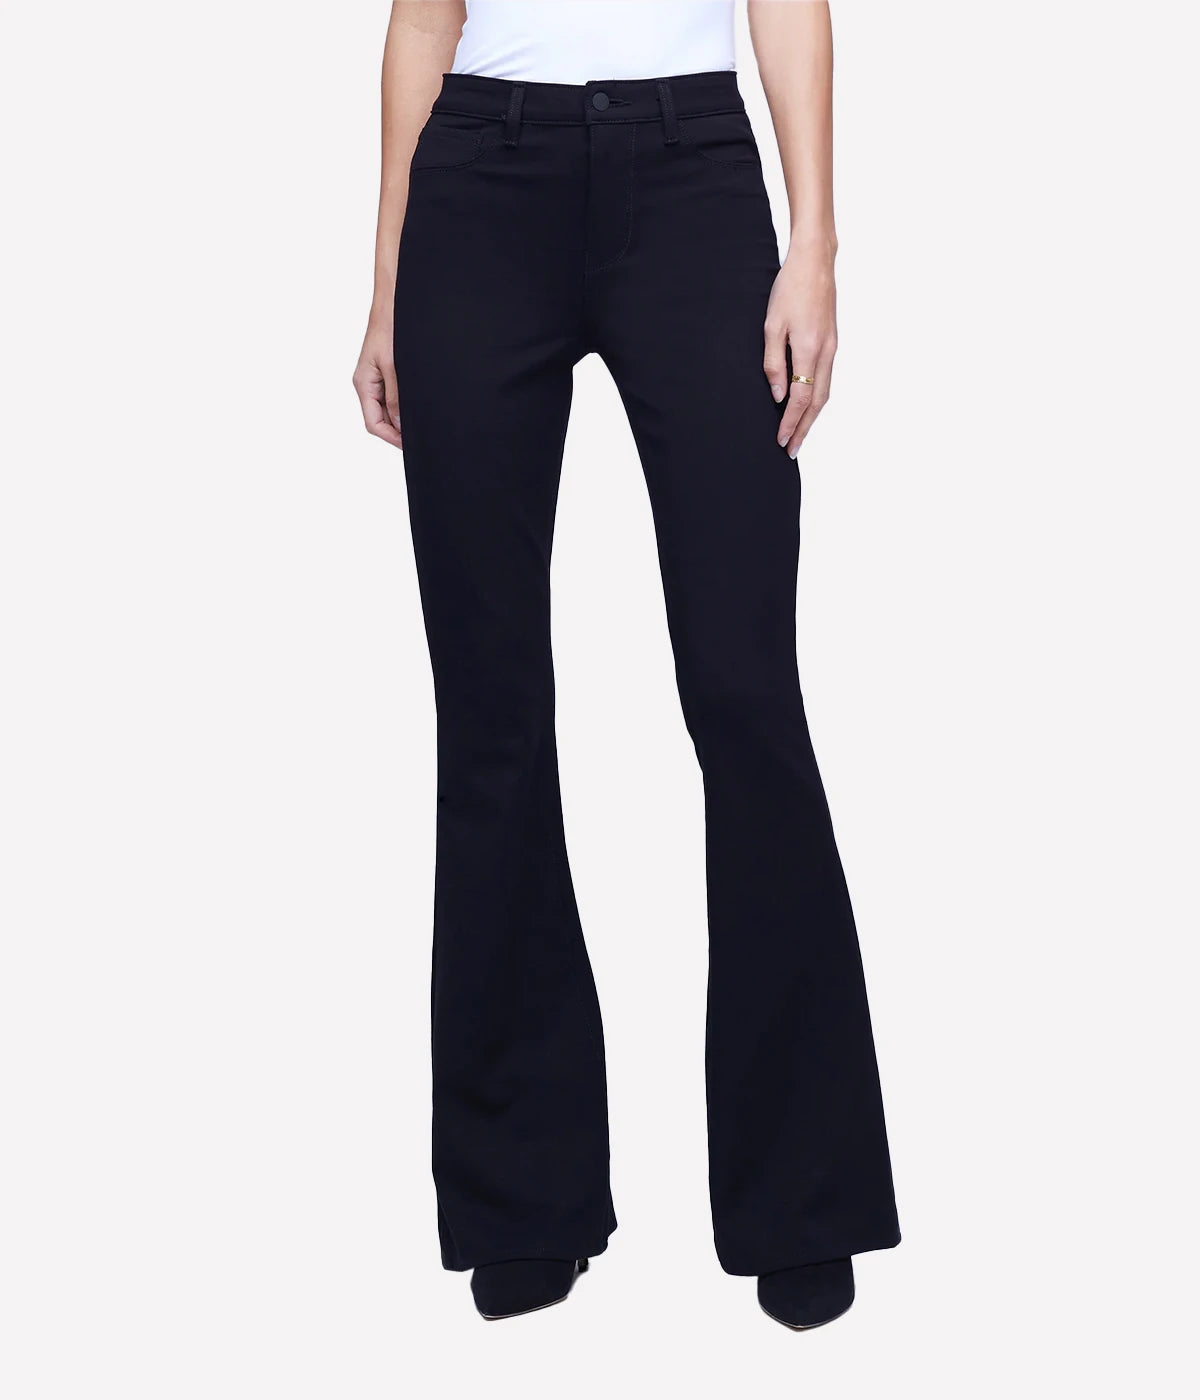 Marty High Rise Flare Jean in Black